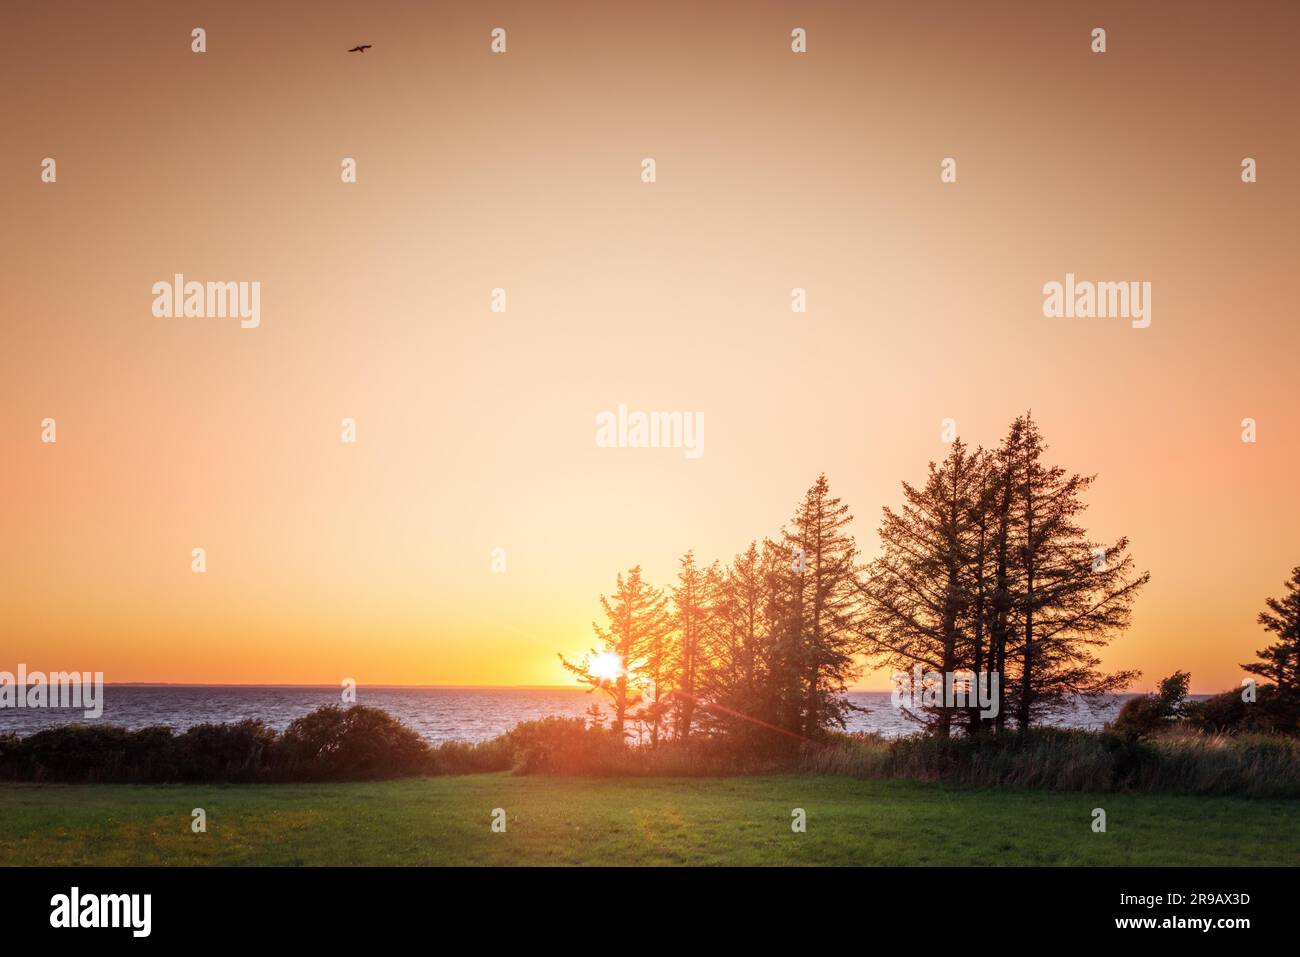 Sunset by the ocean with pine tree silhouettes in the late evening Stock Photo